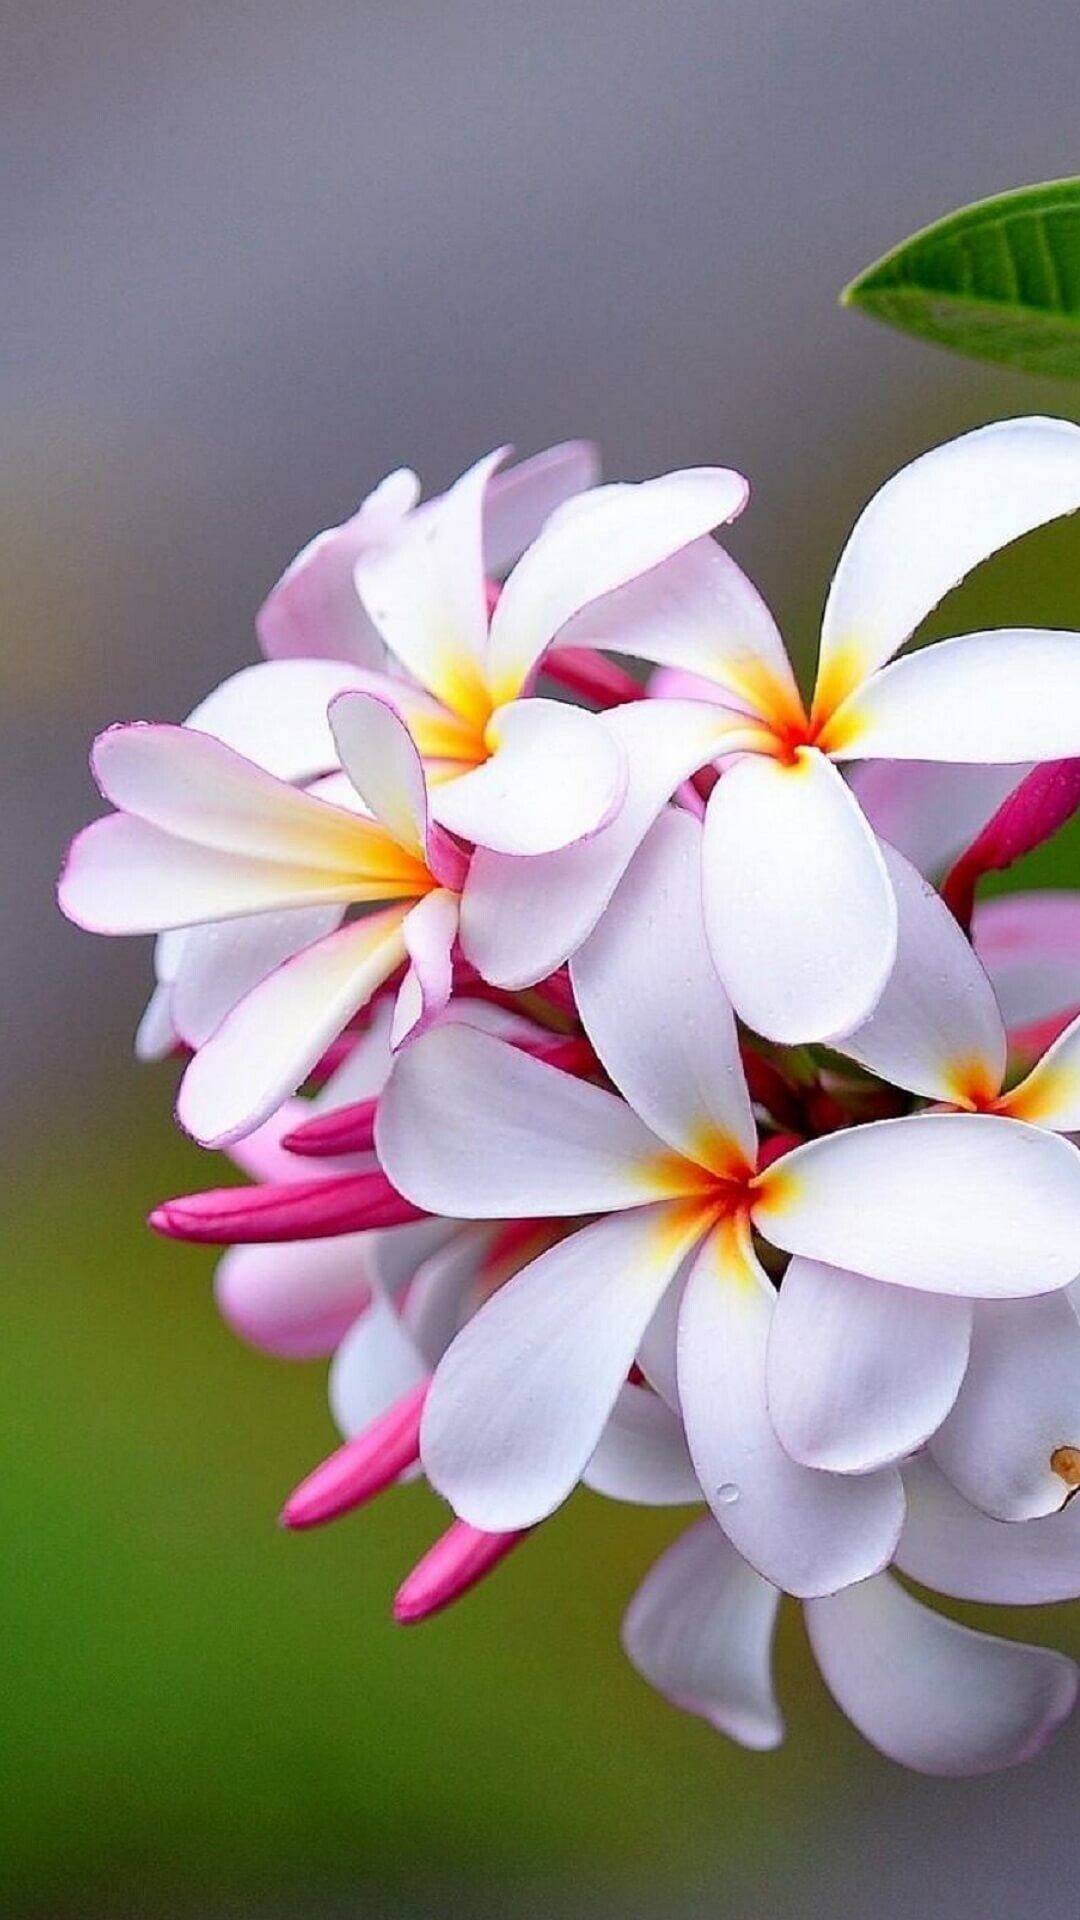 Frangipani Flower: The genus Plumeria includes more than a dozen accepted species, and one or two dozen open to review, with over a hundred regarded as synonyms. 1080x1920 Full HD Wallpaper.